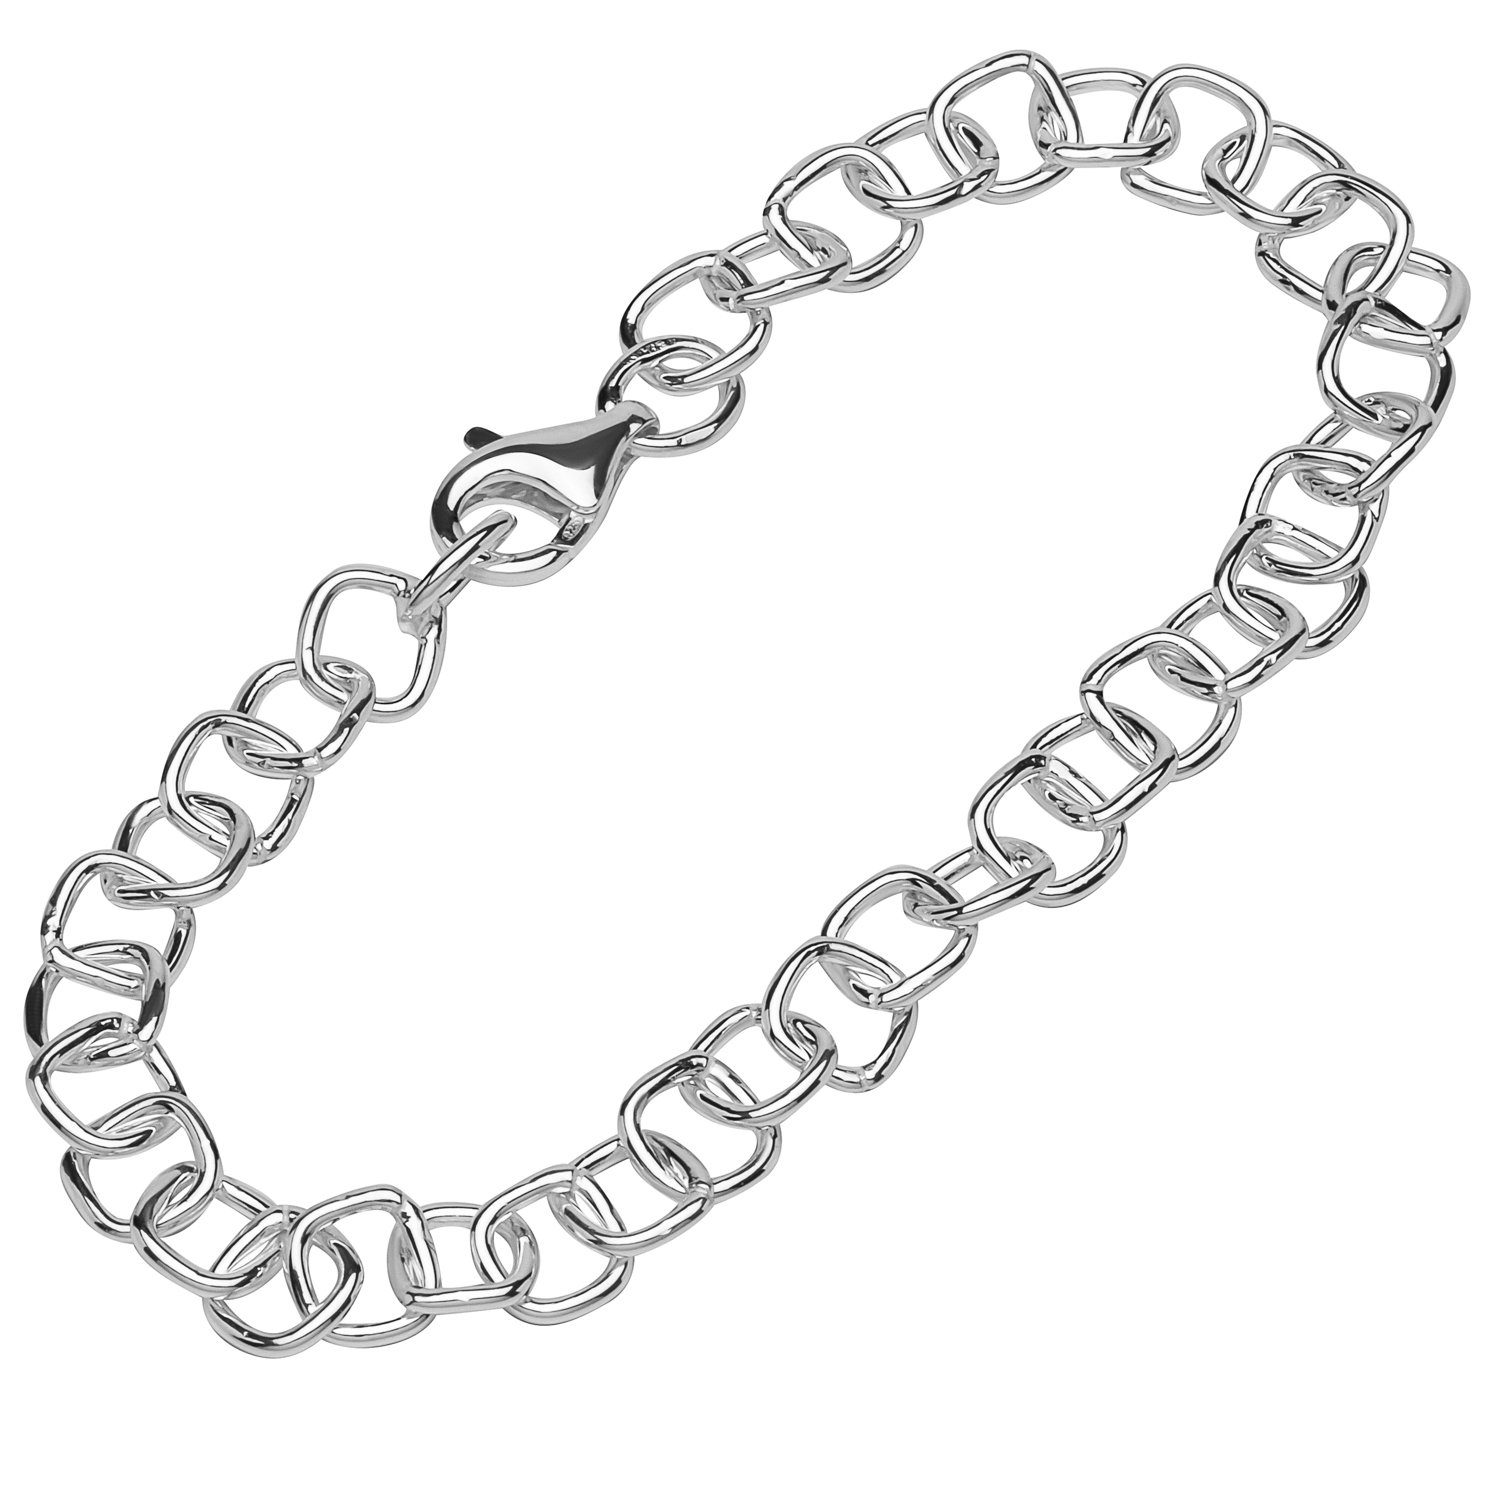 NKlaus Silberarmband Armband 925 Sterling Silber 22cm Ankerkette vierec (1 Stück), Made in Germany